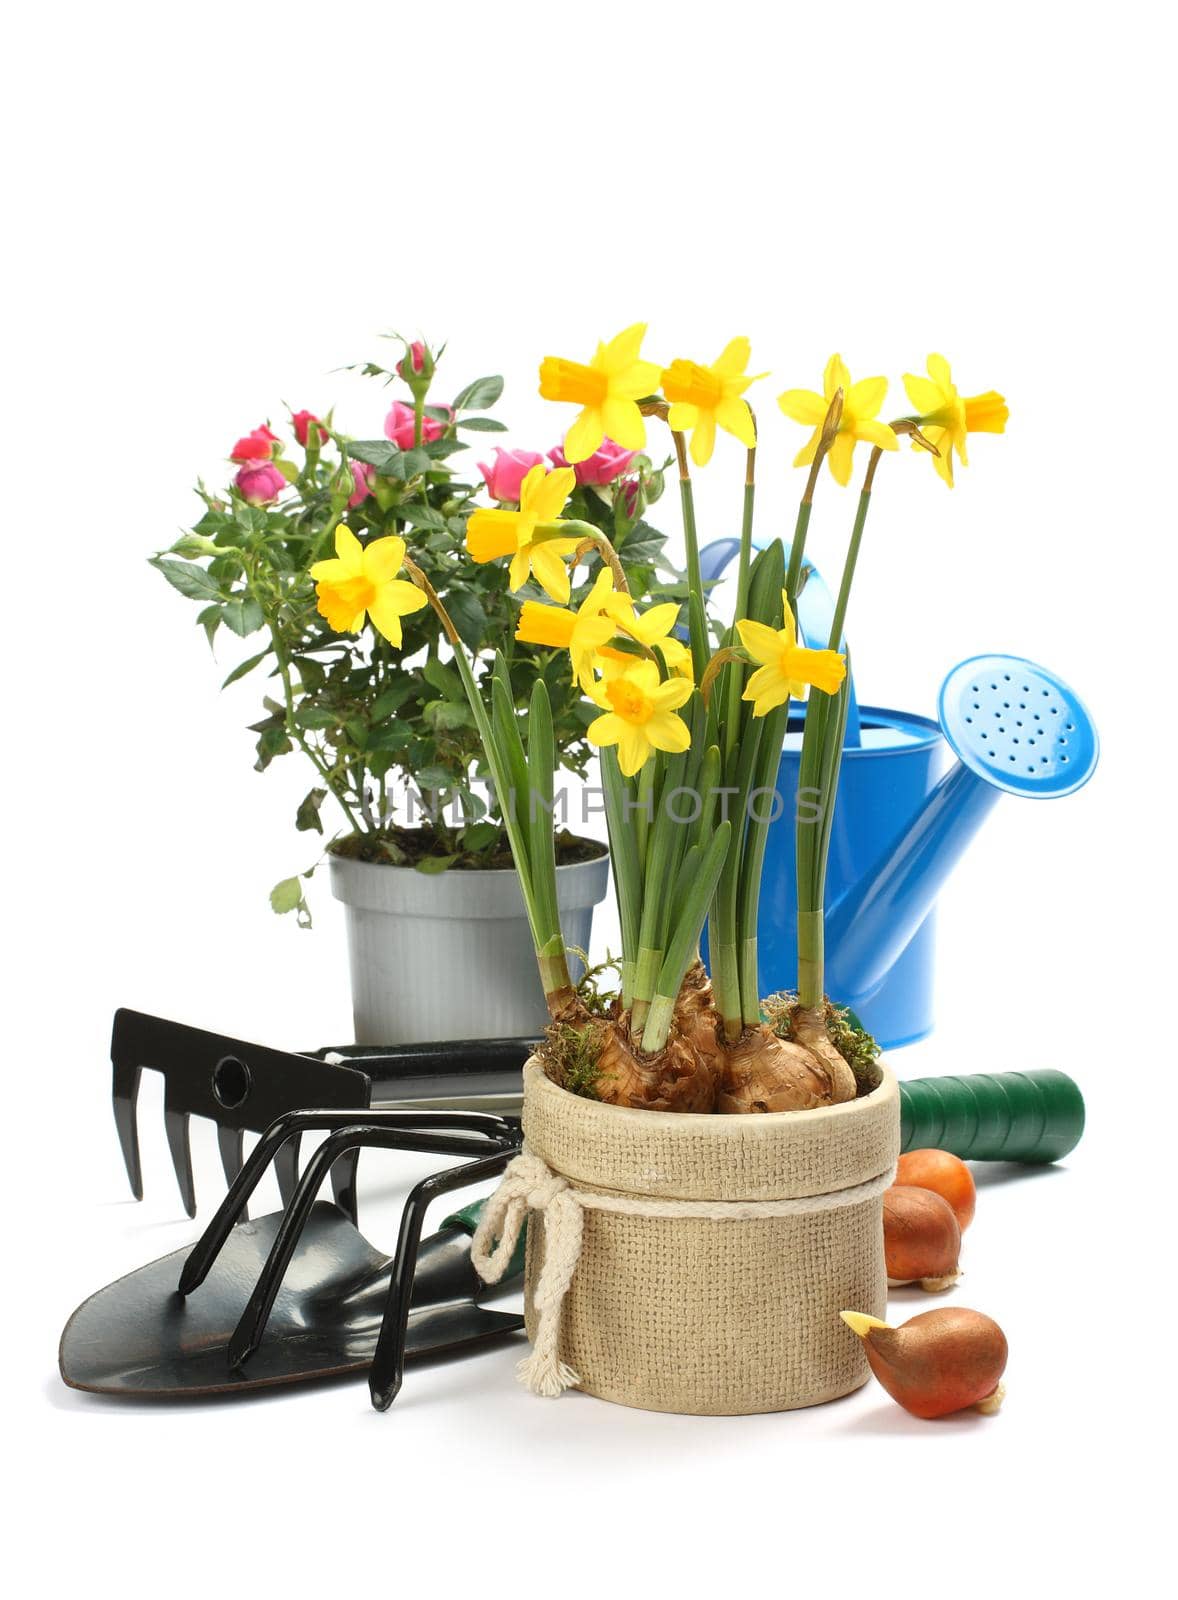 Gardening tools and flowers isolated on white